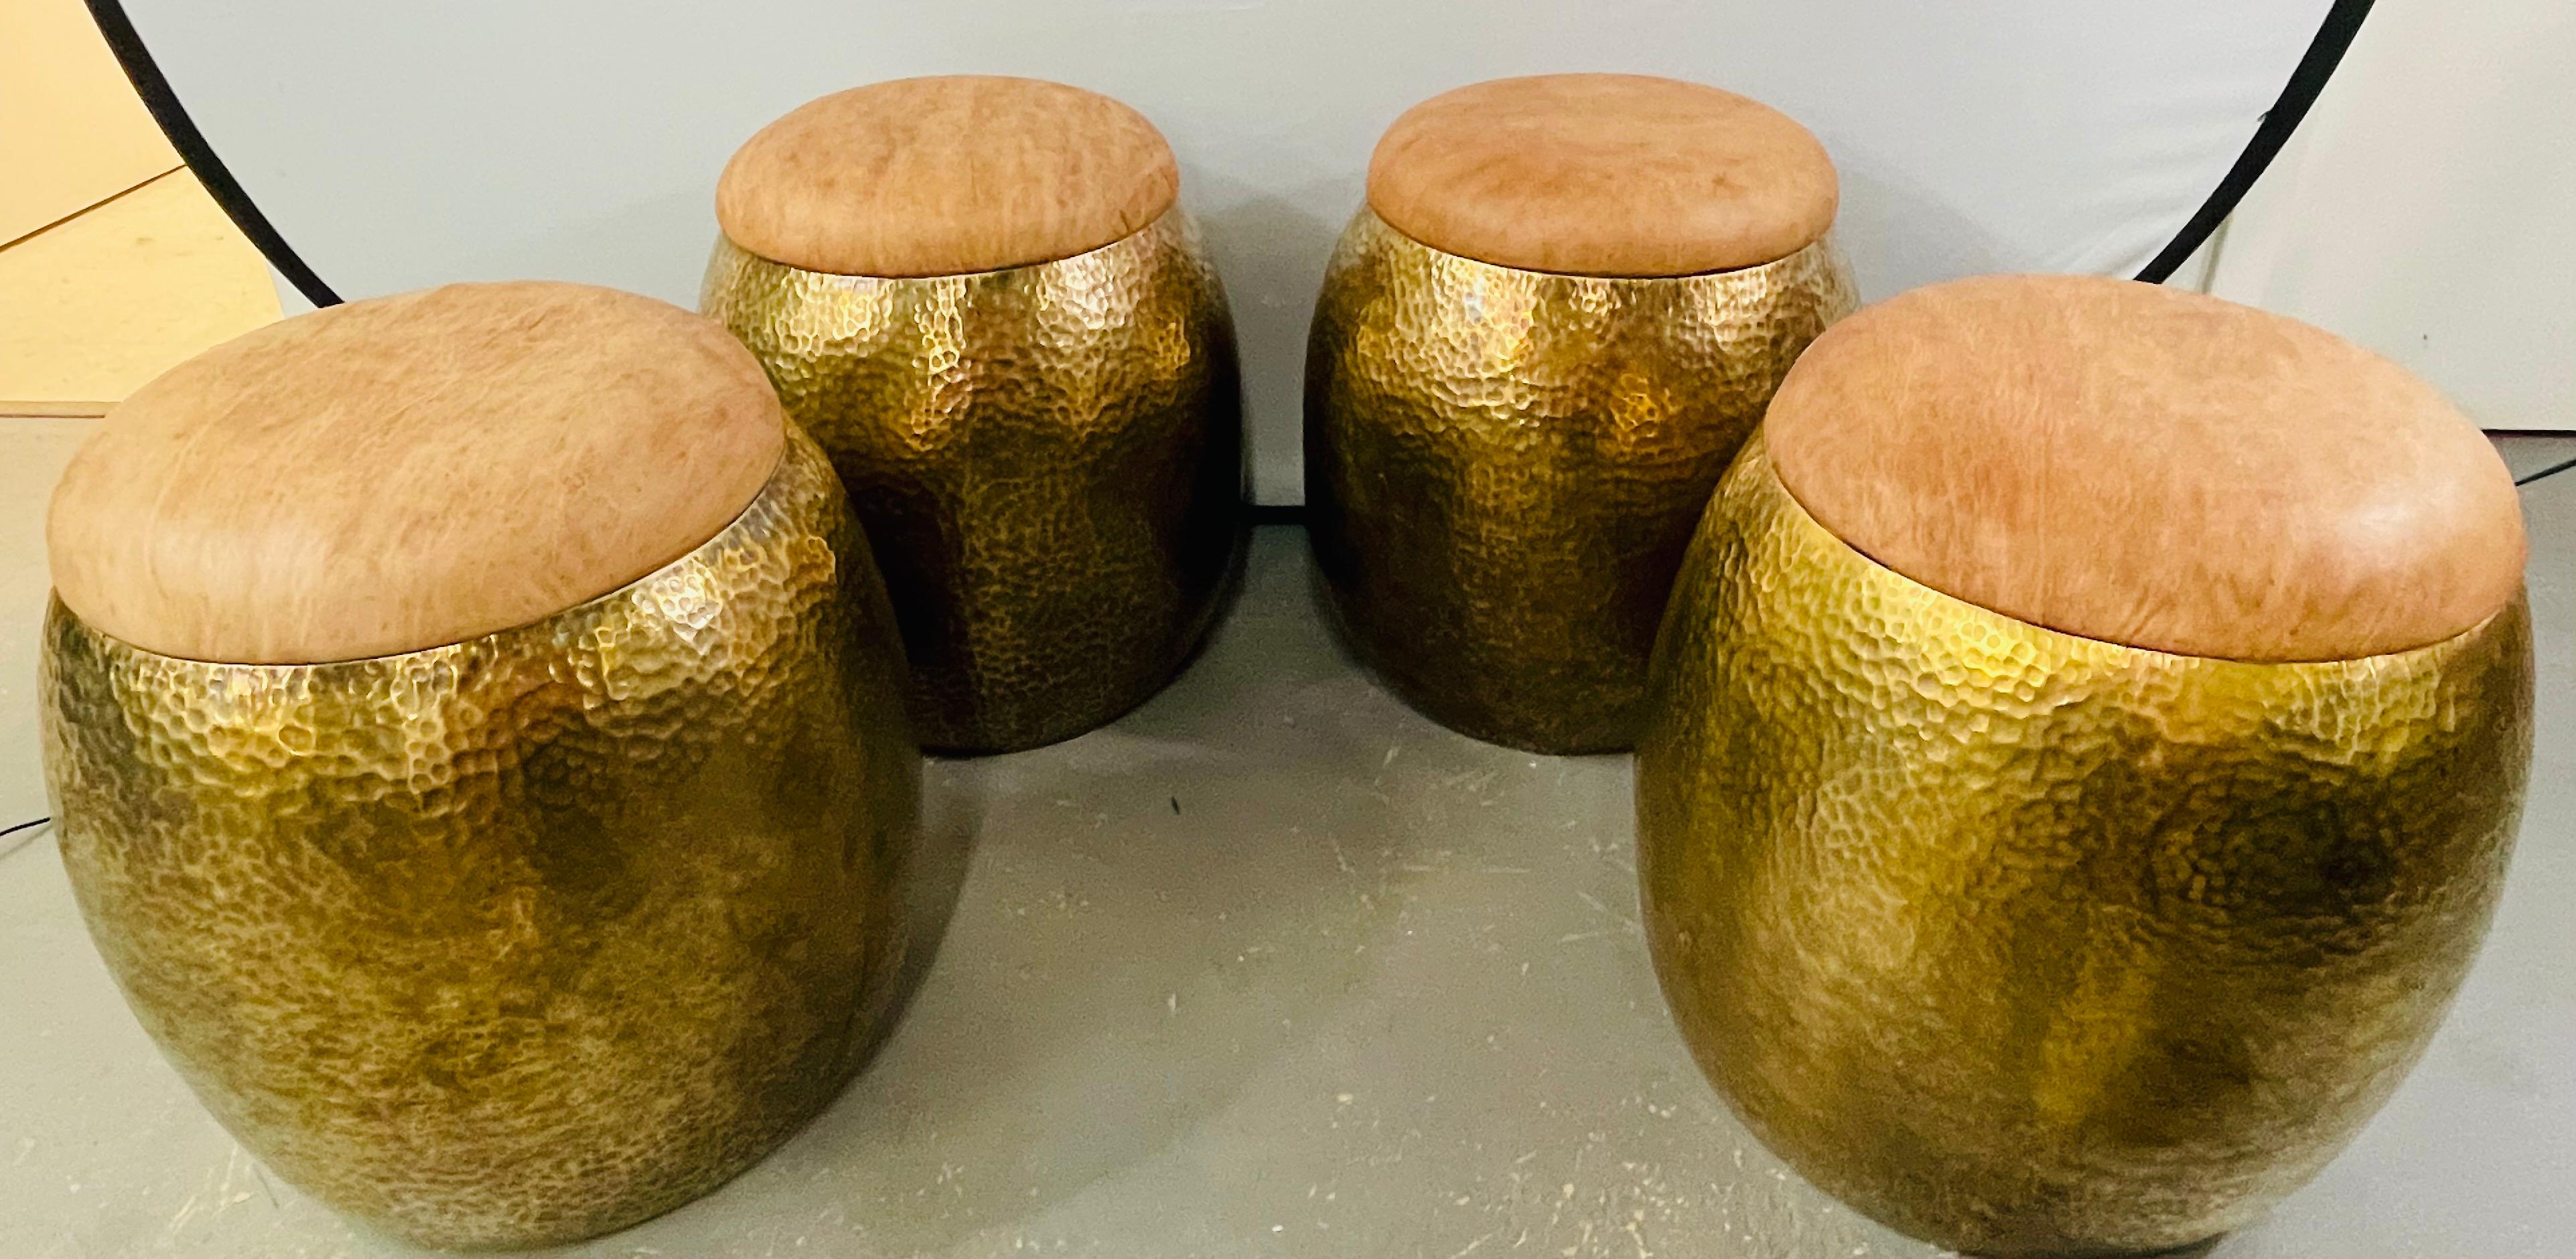 A very chic set of four Mid-Century Modern ottomans or stools handmade using the finest leather in a classy and fashionable natural beige or light brown tone and quality gold brass. The handcrafted stool features a hammered style with an antique